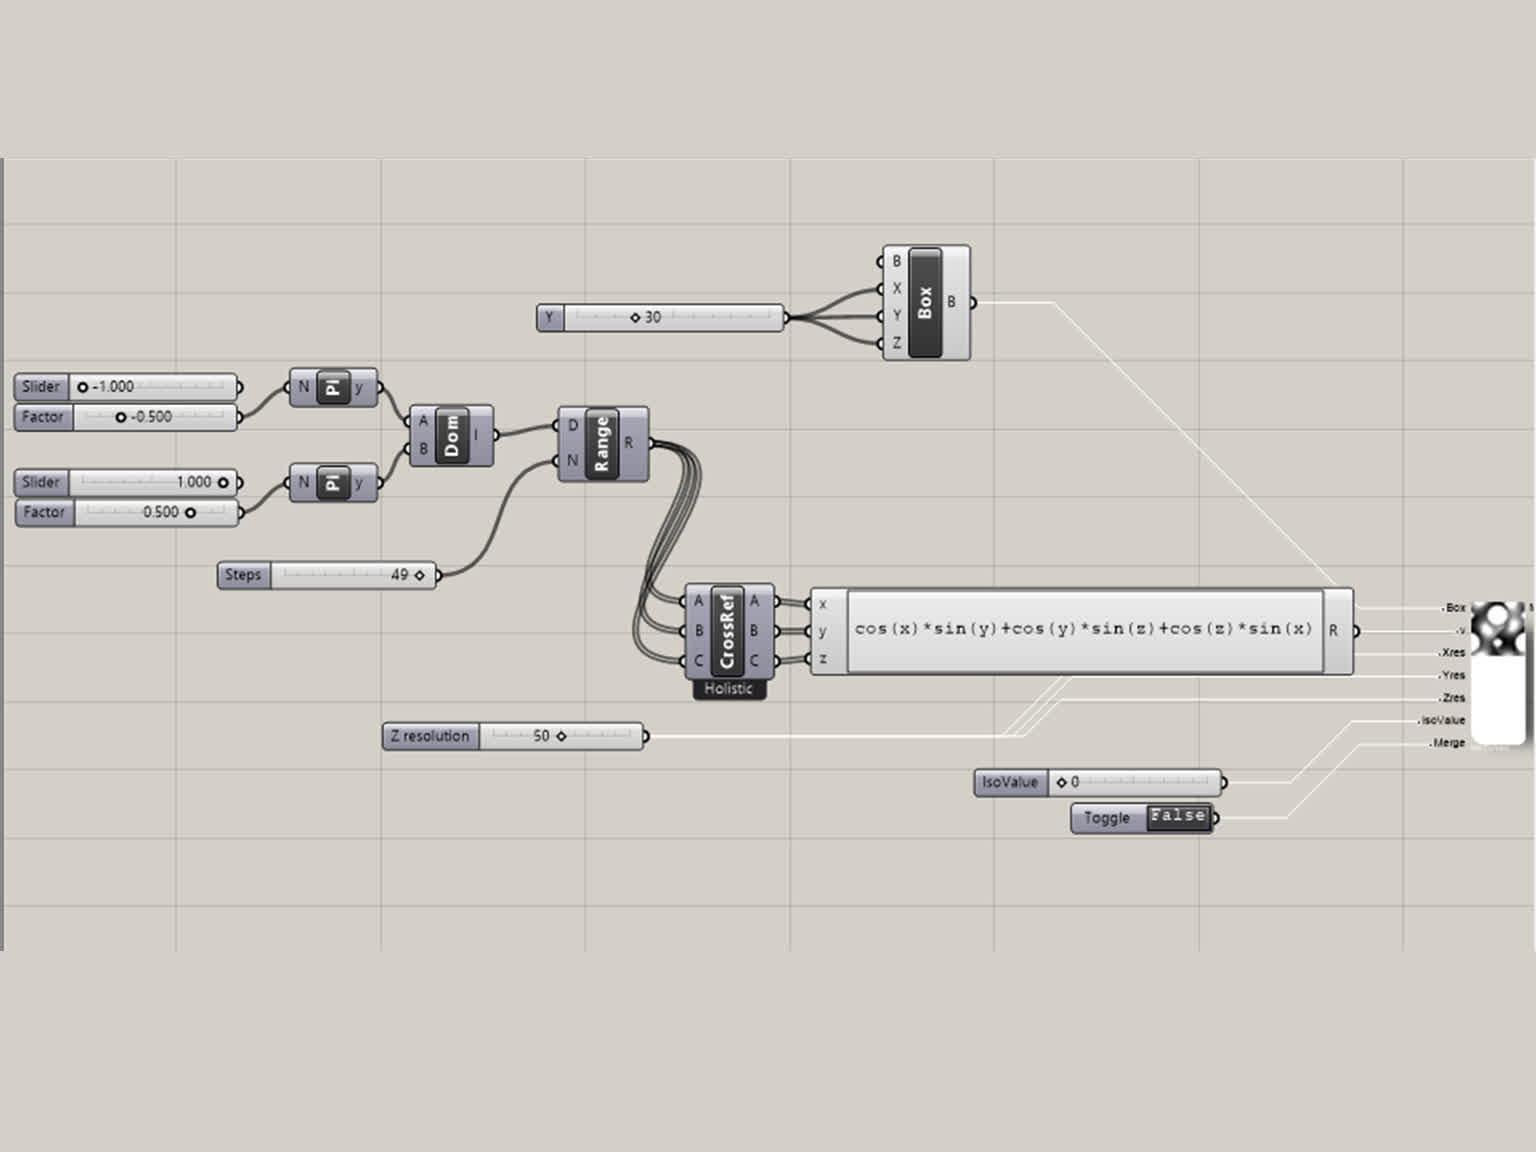 Grasshopper screenshot showing the flowchart and formula used to build the gyroid mesh